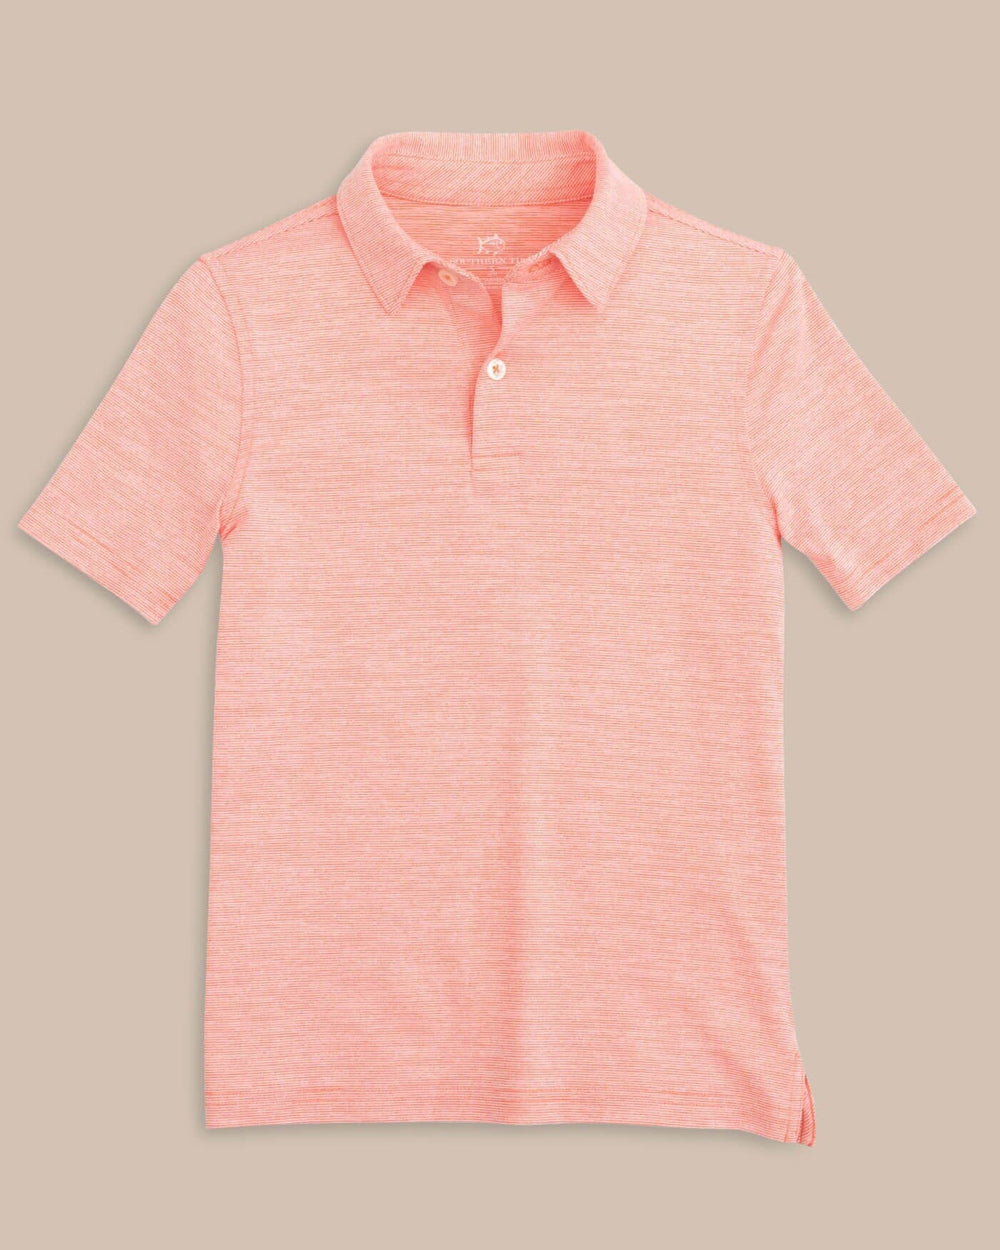 The front view of the Southern Tide Team Colors Boy's Driver Spacedye Polo Shirt by Southern Tide - Endzone Orange